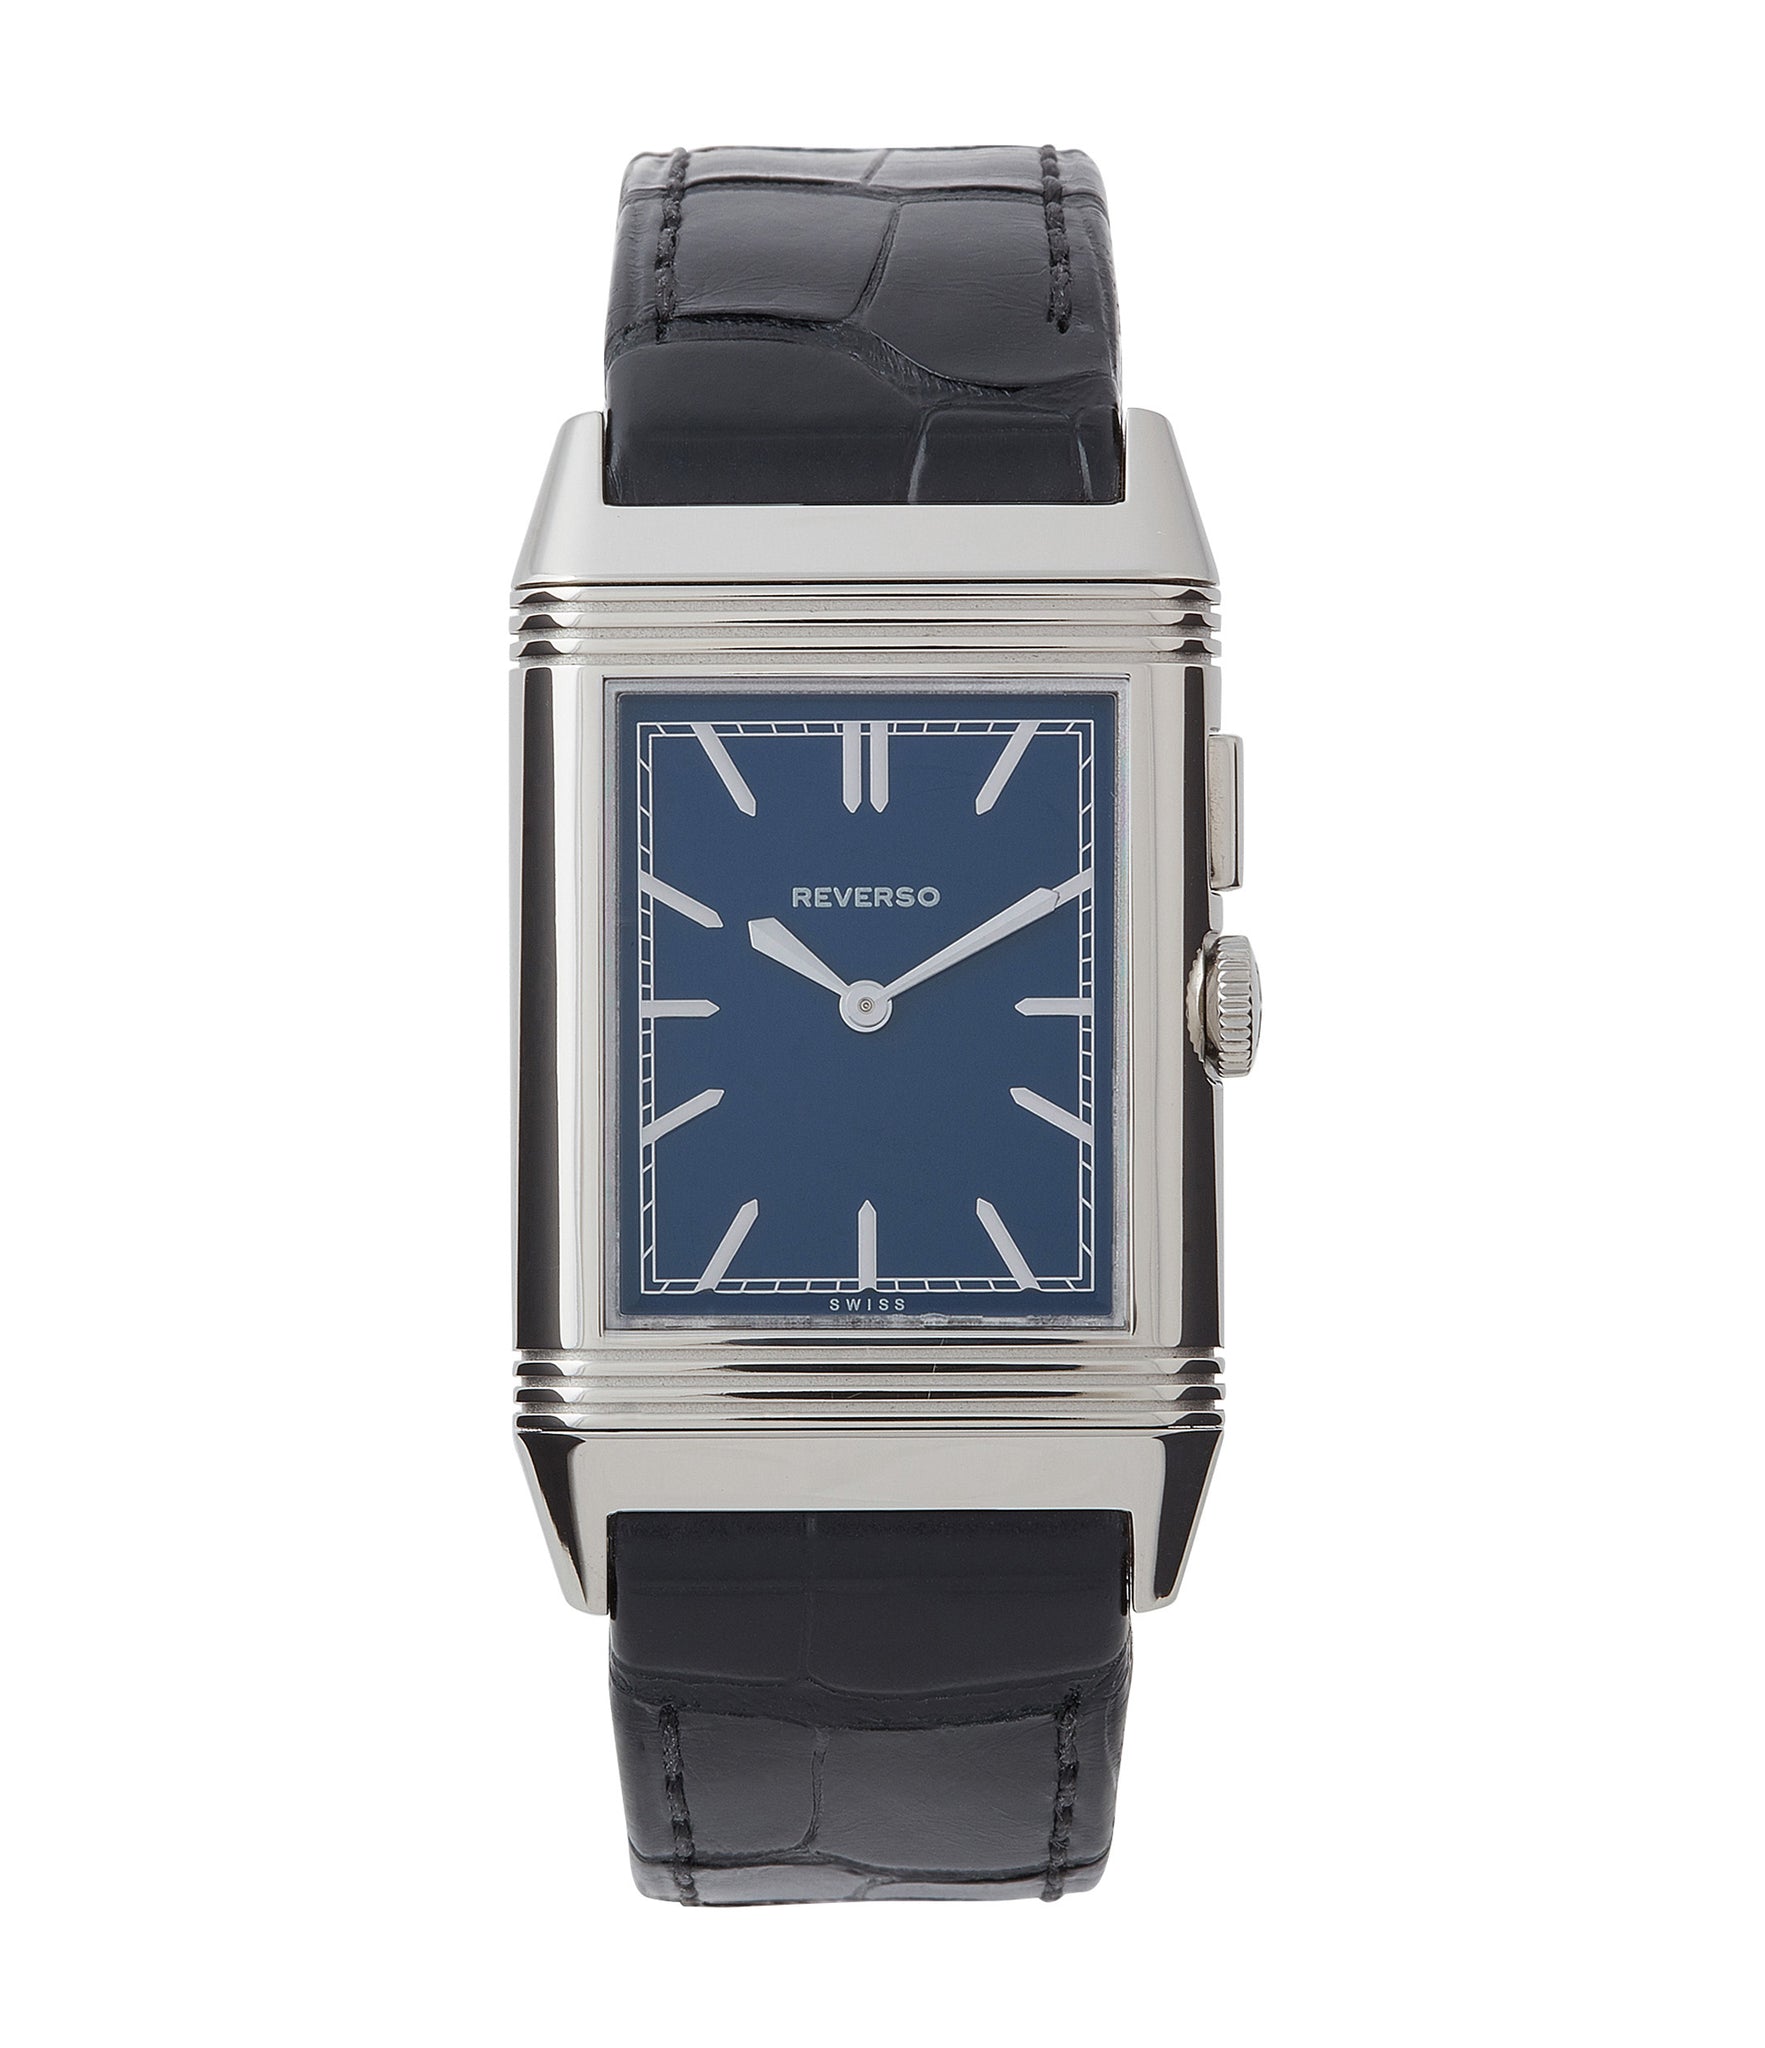 Jaeger-LeCoultre Grand Reverso Ultra-Thin Duoface Blue & Silver Dial ...